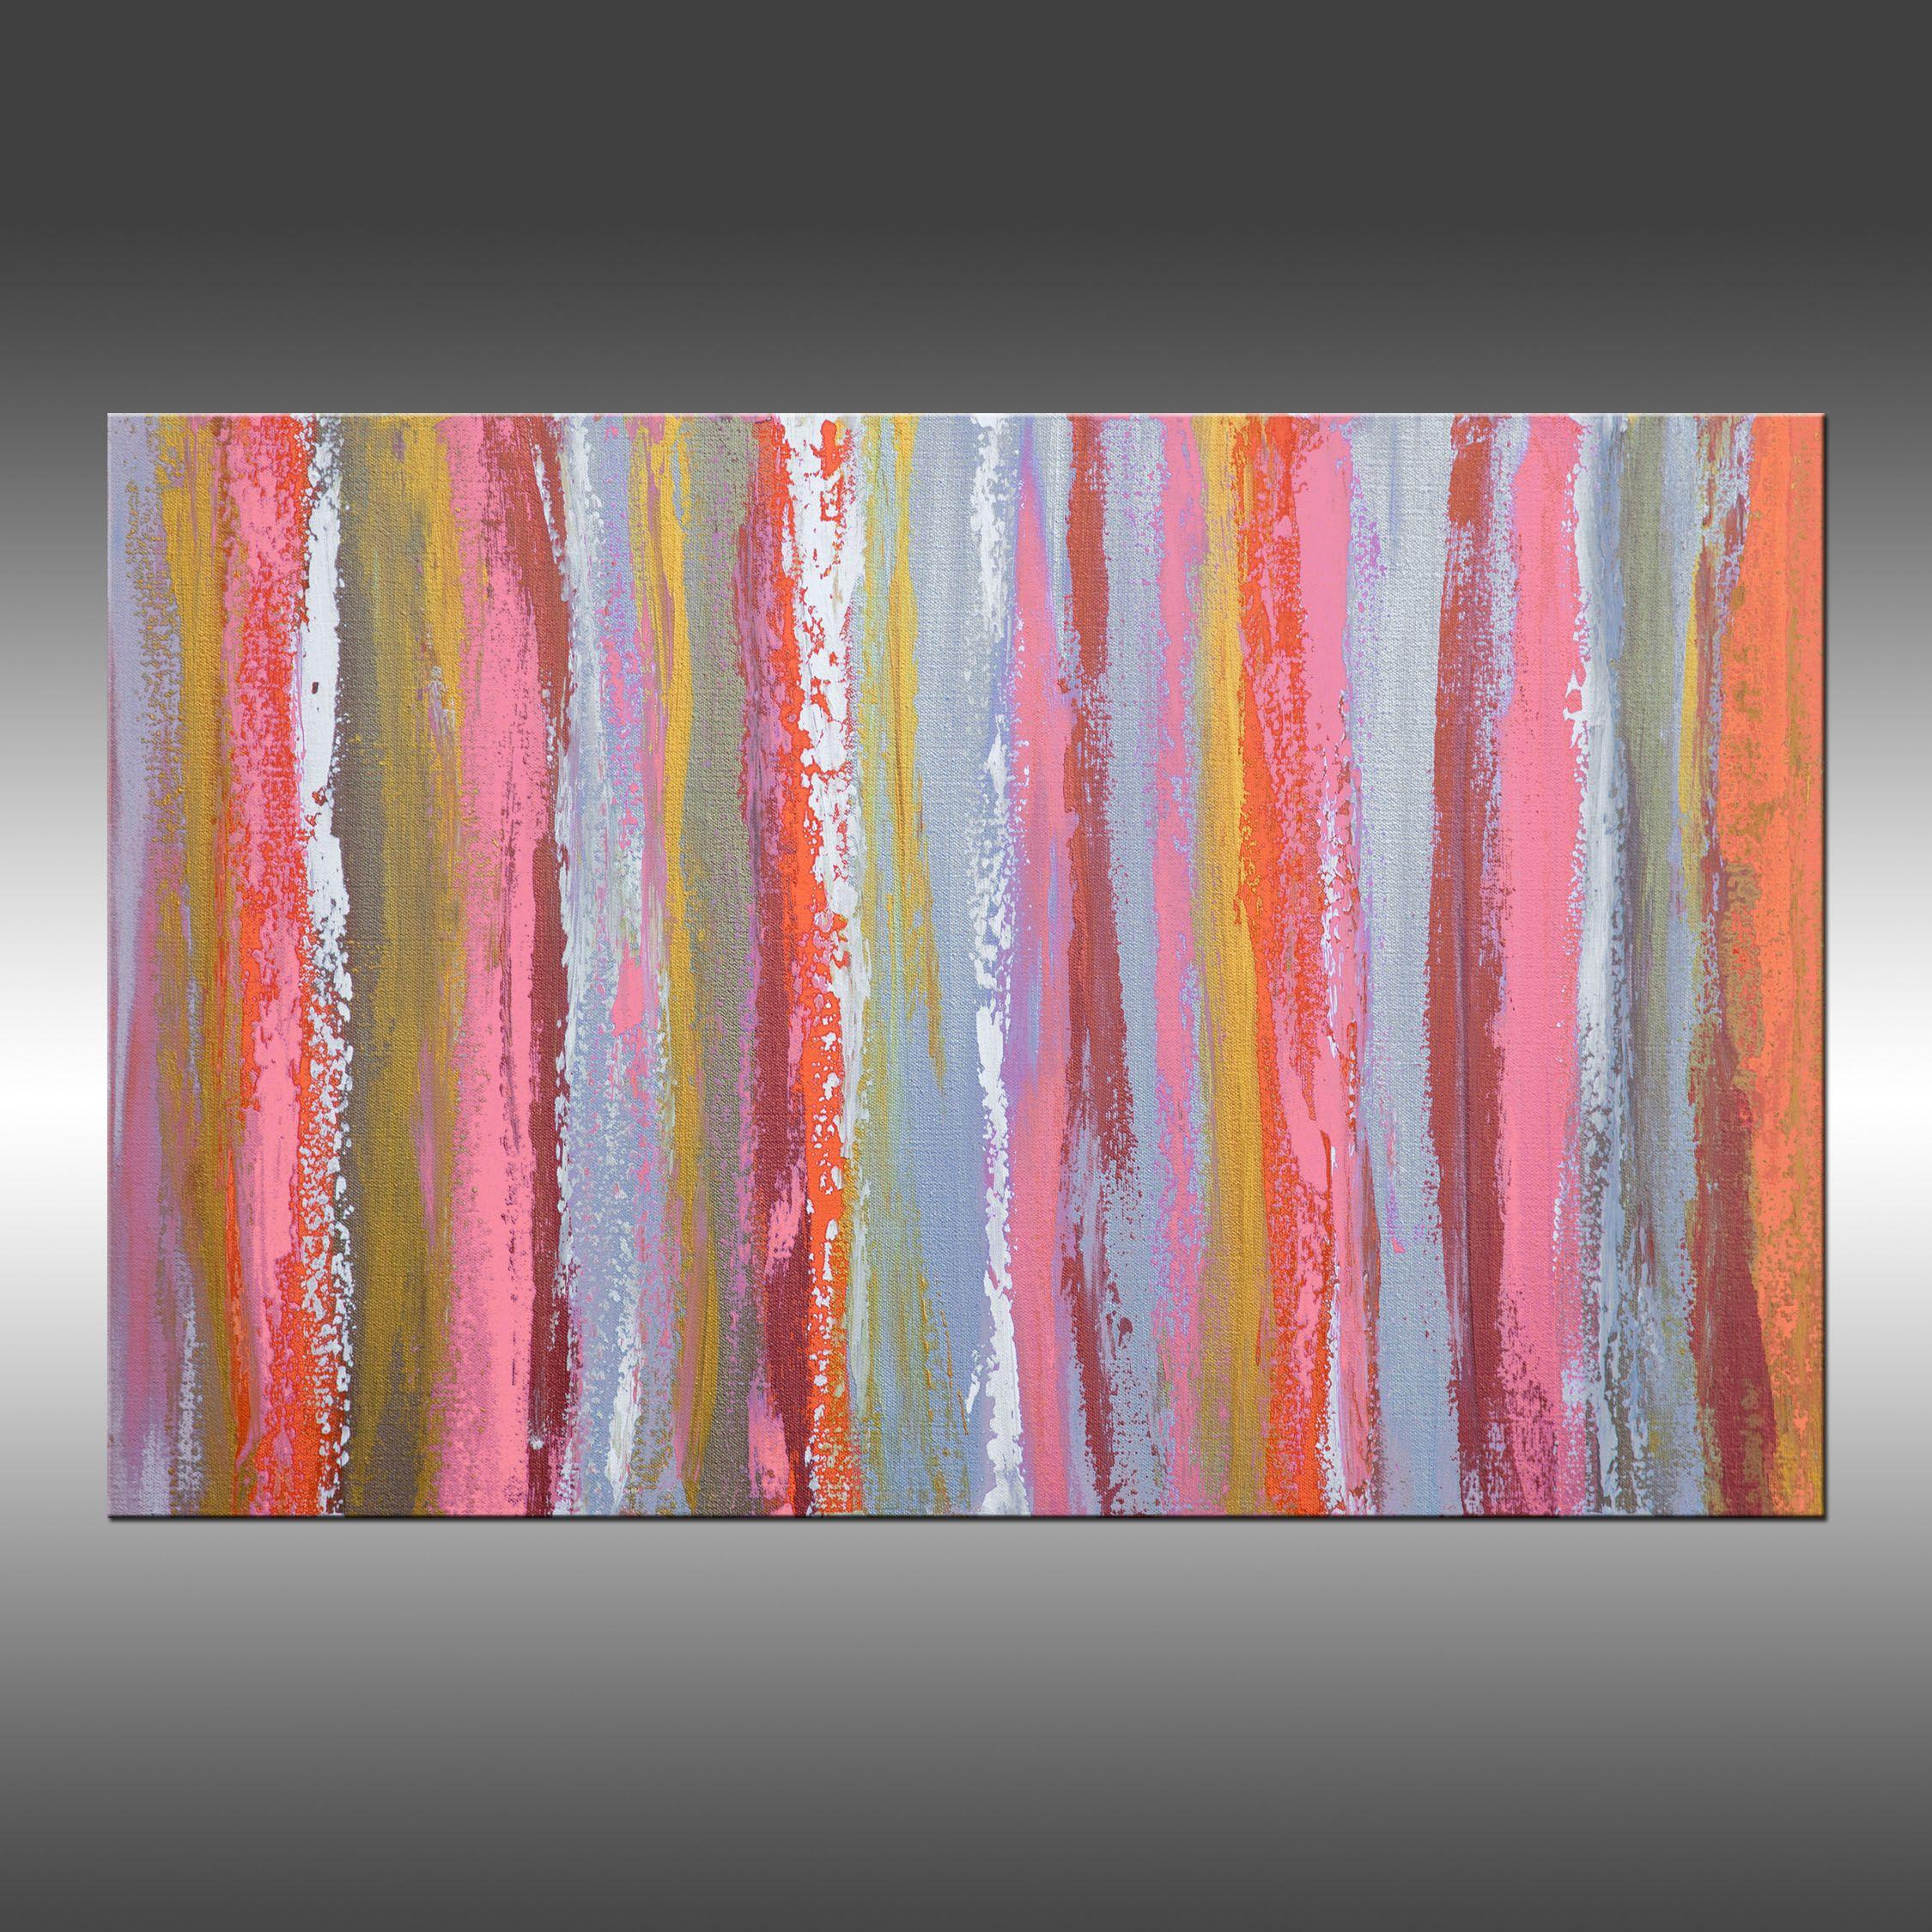 Pink & Metal 2 is an original painting, created with acrylic paint on gallery-wrapped canvas. It has a width of 30 inches and a height of 20 inches with a depth of 1.5 inches (20x30x1.5). This painting can be hung vertically or horizontally.    The